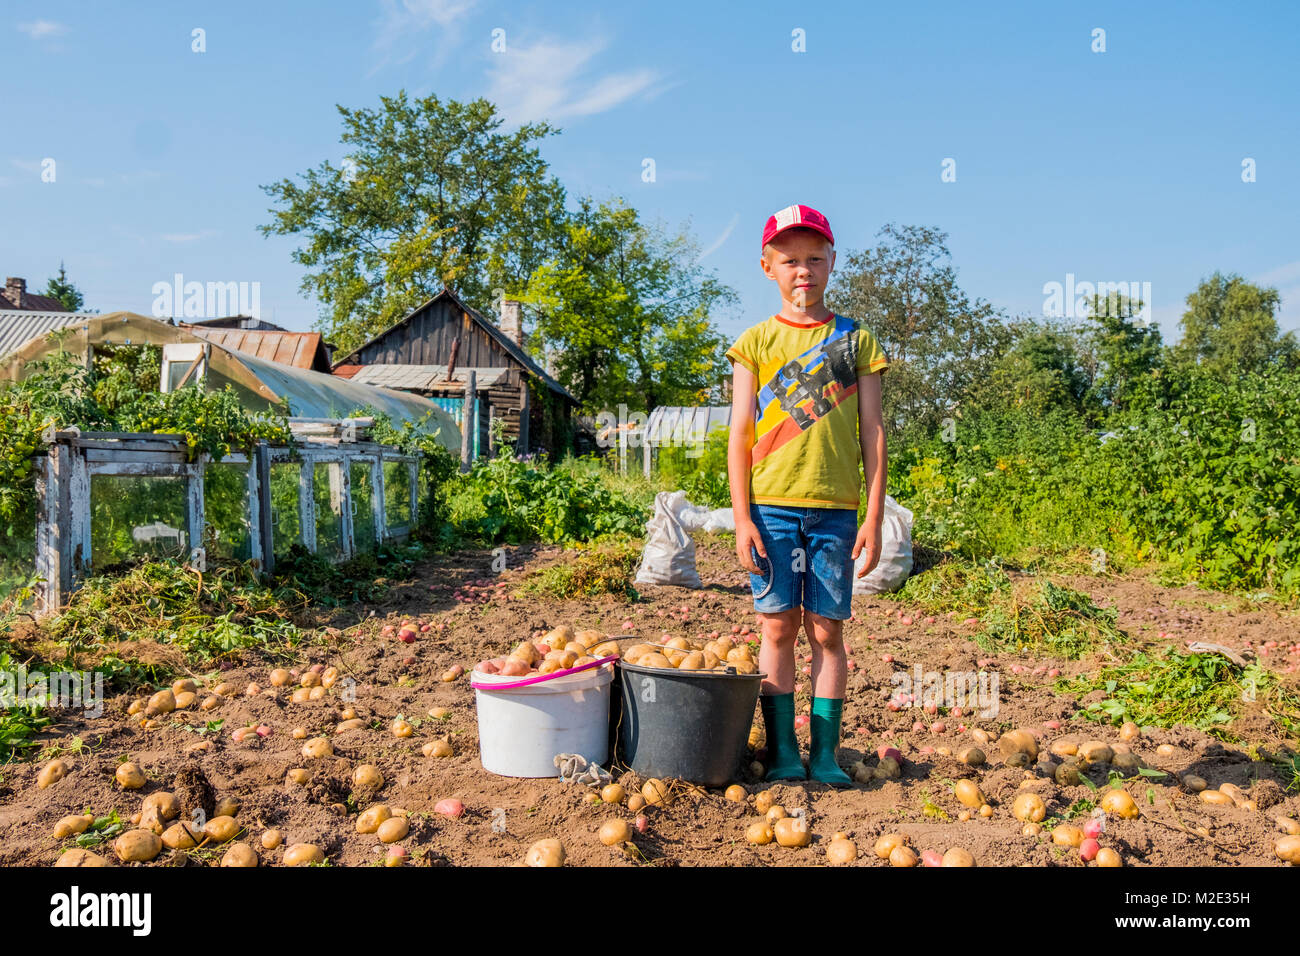 Caucasian boy standing on farm with buckets of potatoes Stock Photo